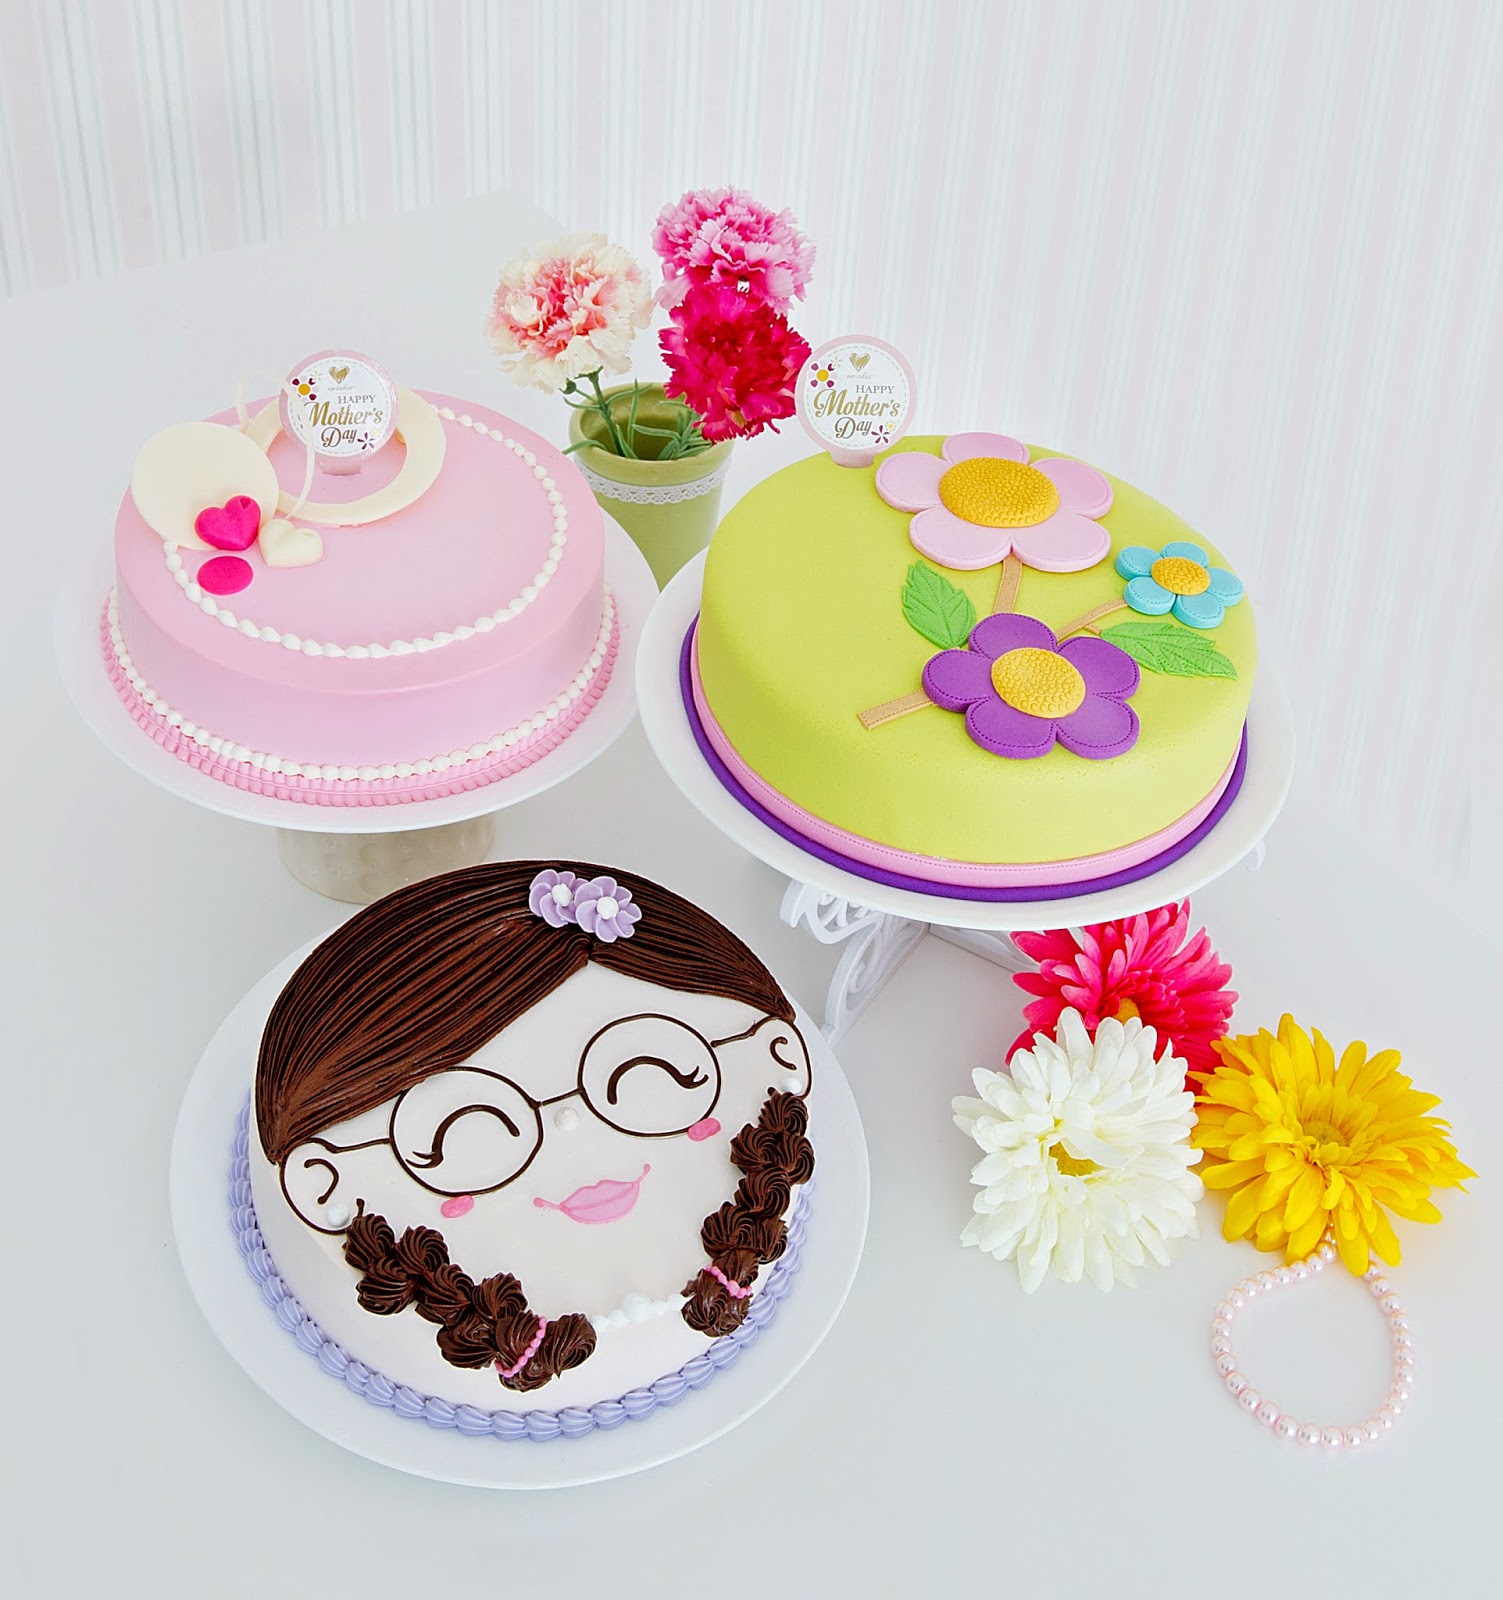 Best Certified Low GI Diabetic Friendly Birthday Cakes in Singapore -  Delcie's Desserts and Cakes